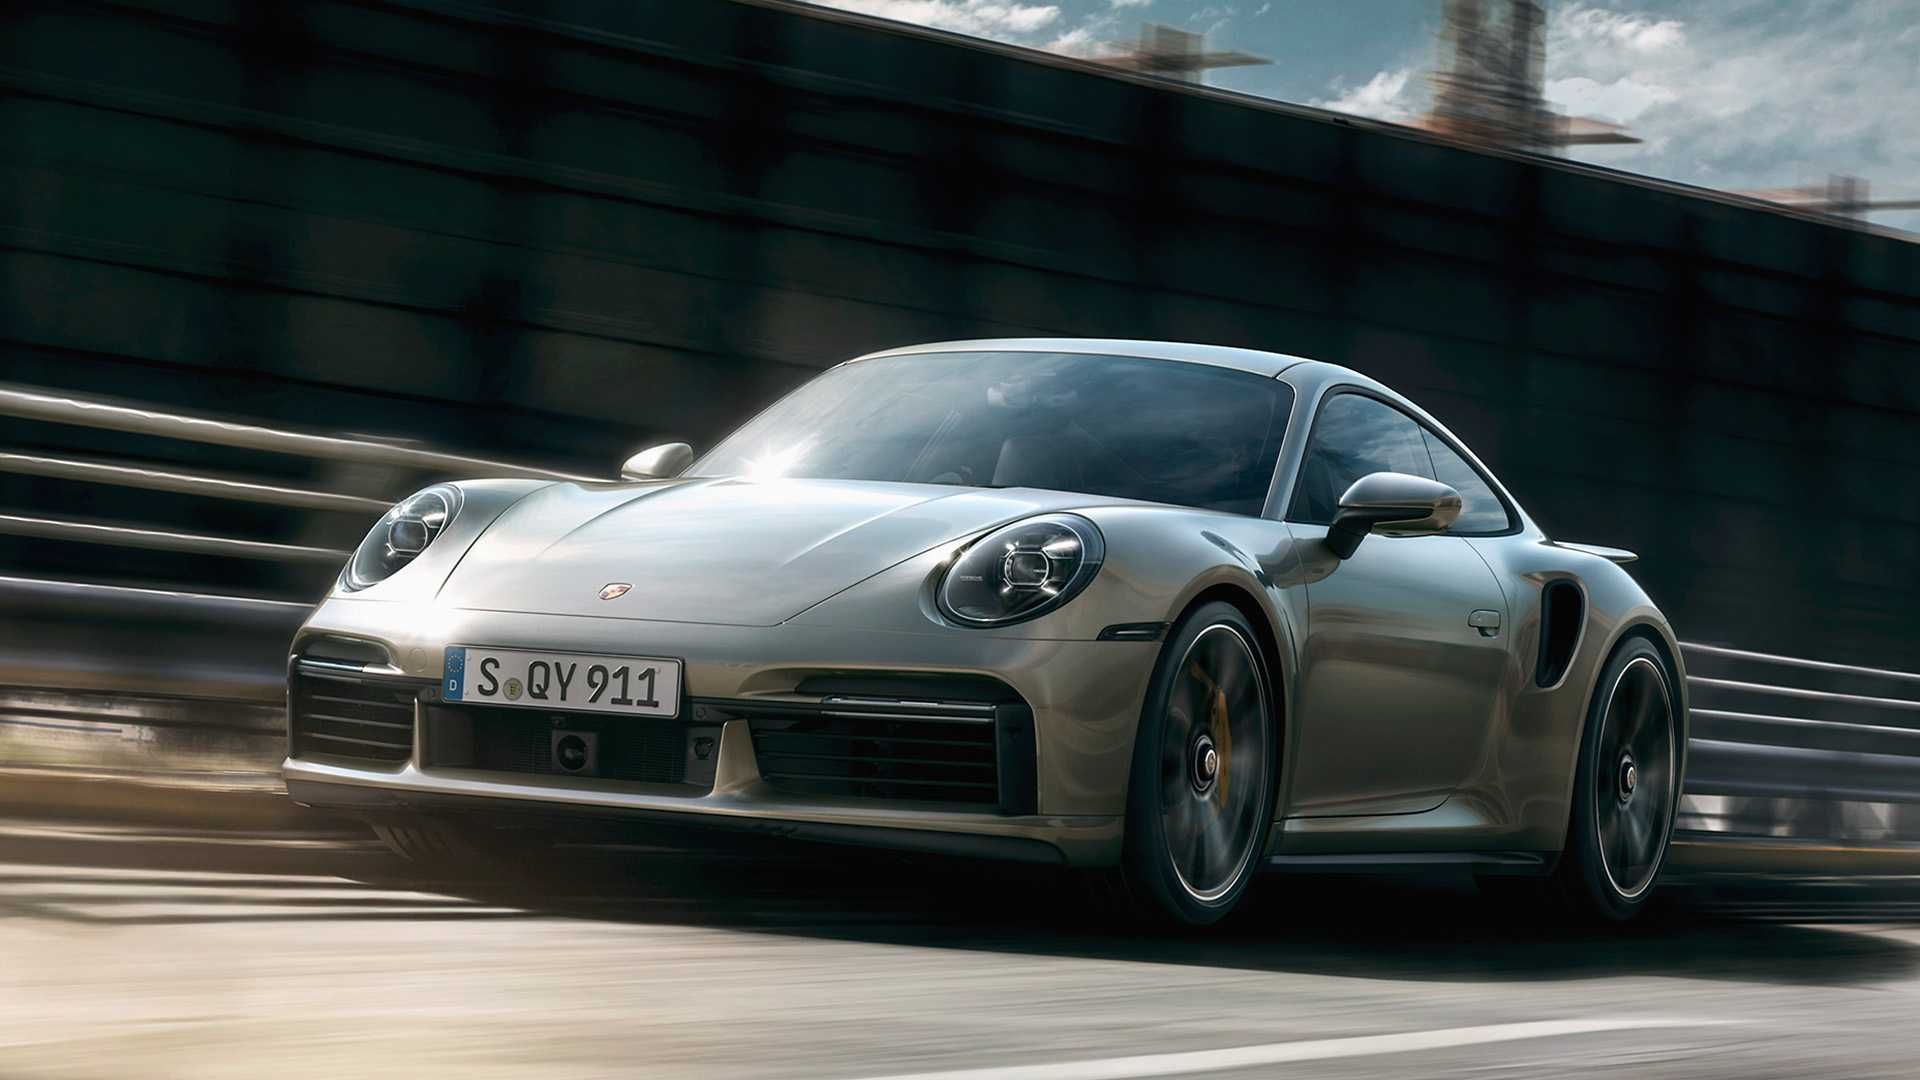 2021 Porsche 911 Turbo S, silver greay, front, driving on the motorway, Porsche